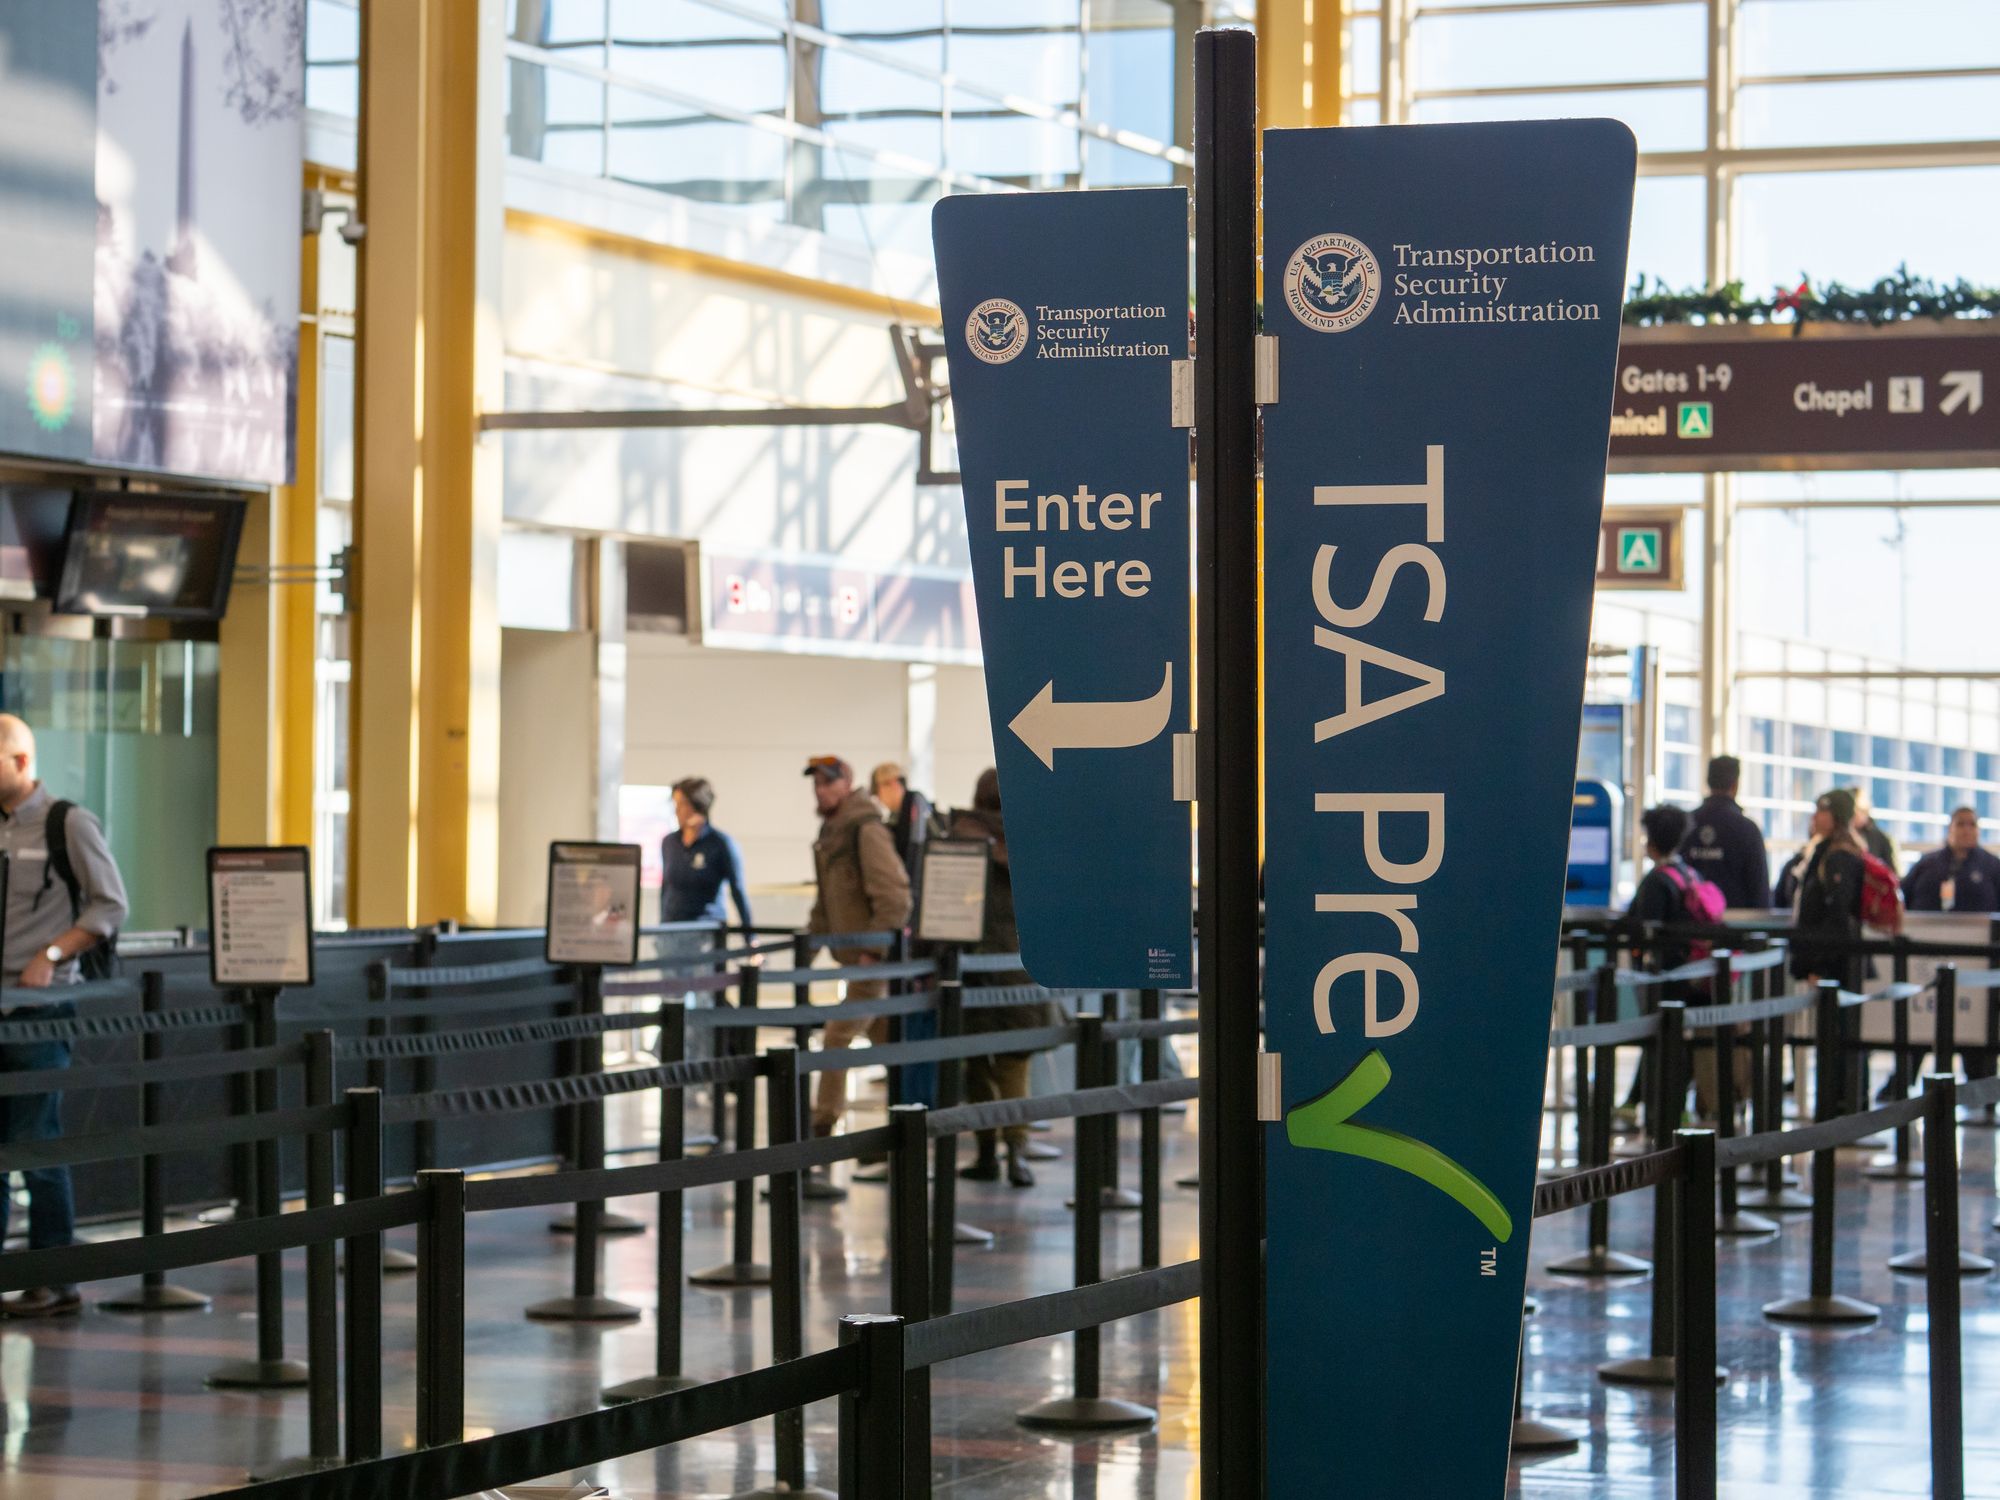 Why You Should Get Global Entry and How It's Different From TSA